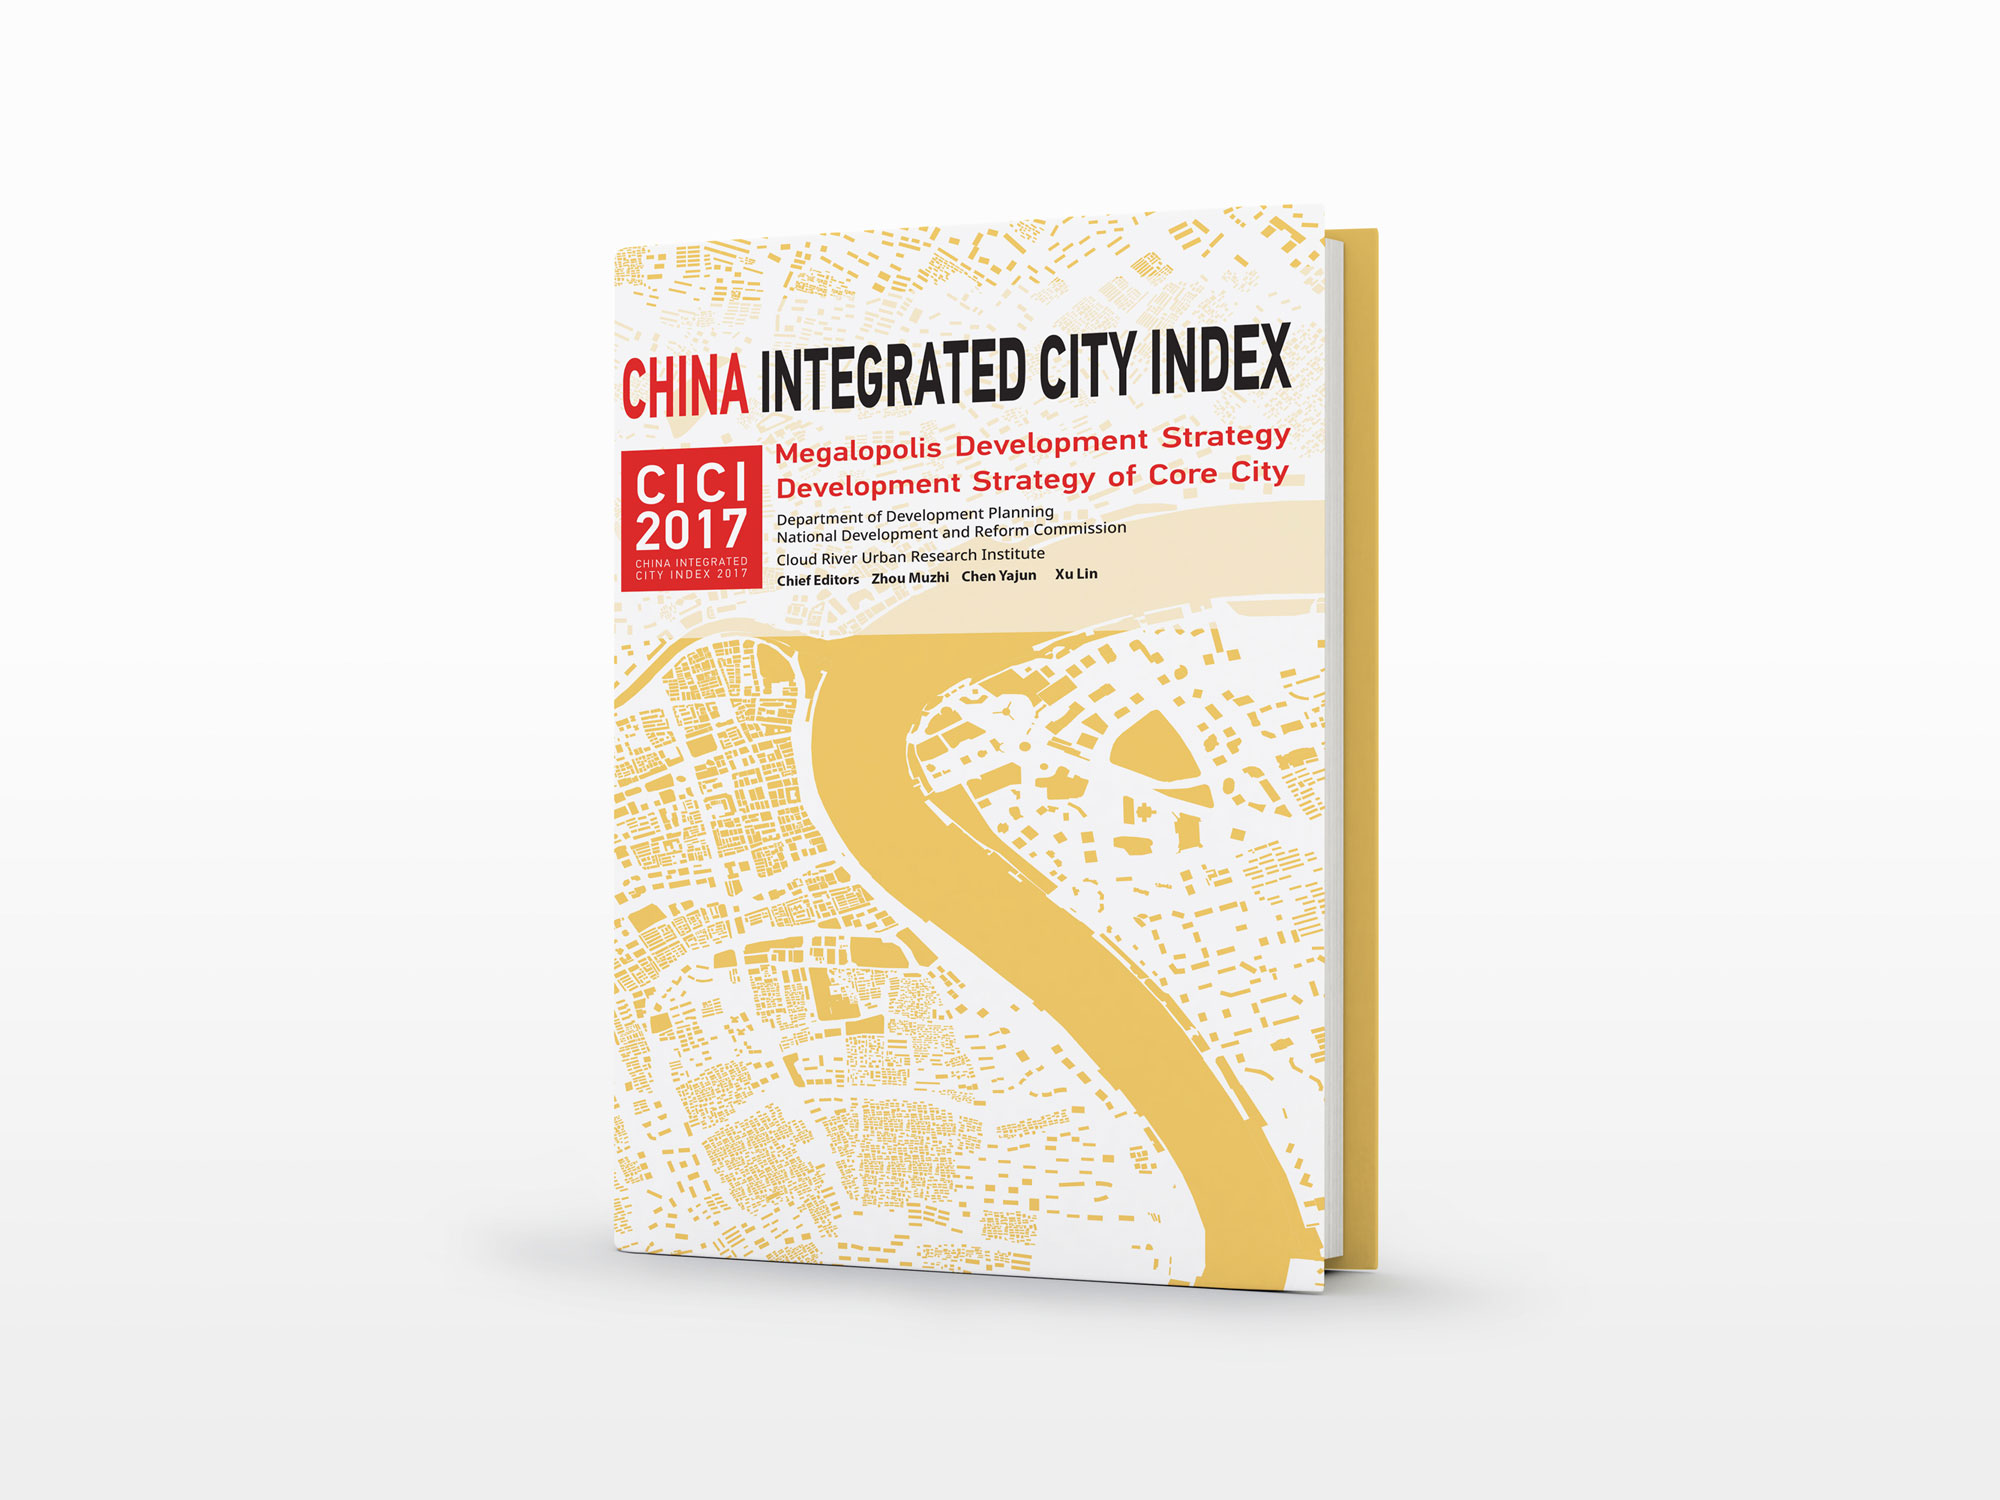 China Integrated City Index 2017